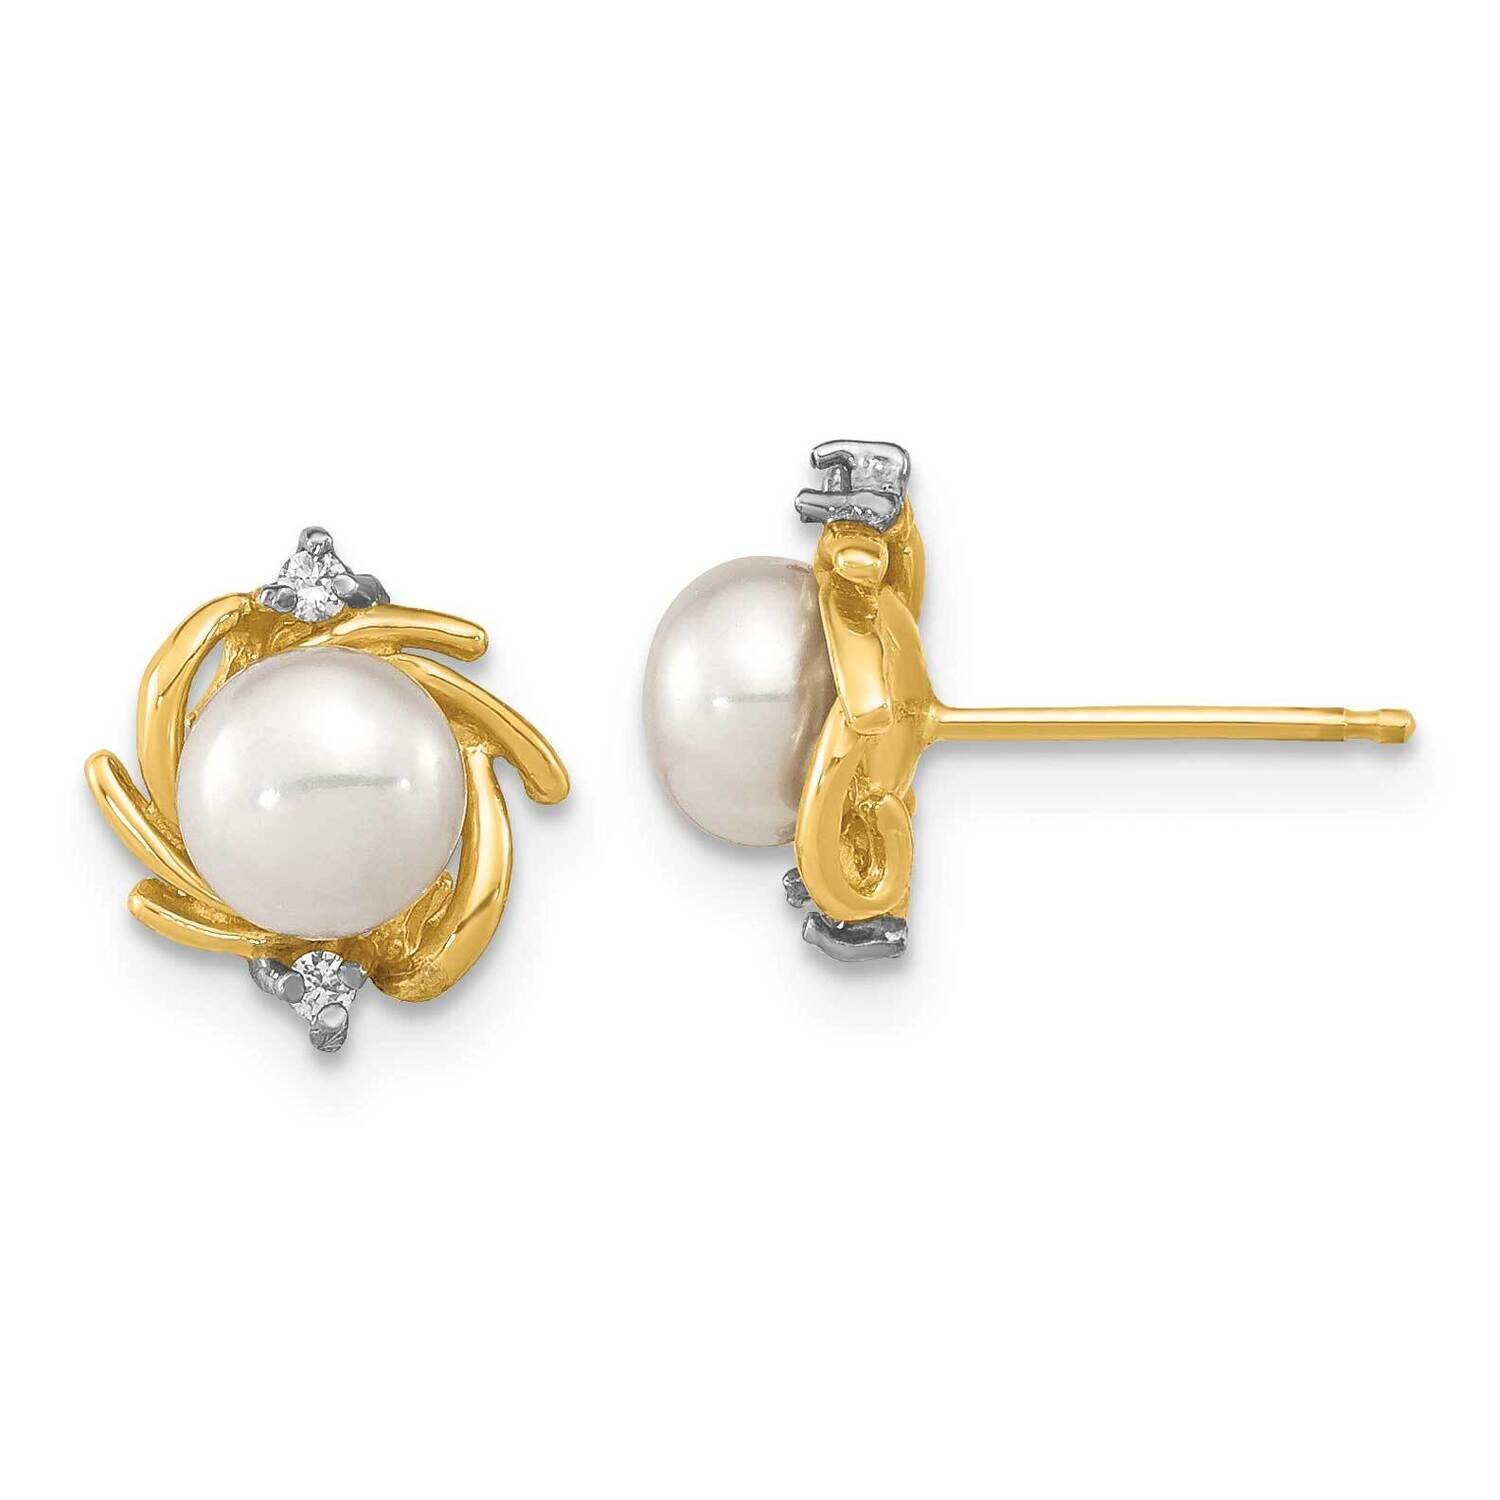 5-6mm Button White Cultured Freshwater Pearl .04Ct. Diamond Earrings 14k Gold SE3036